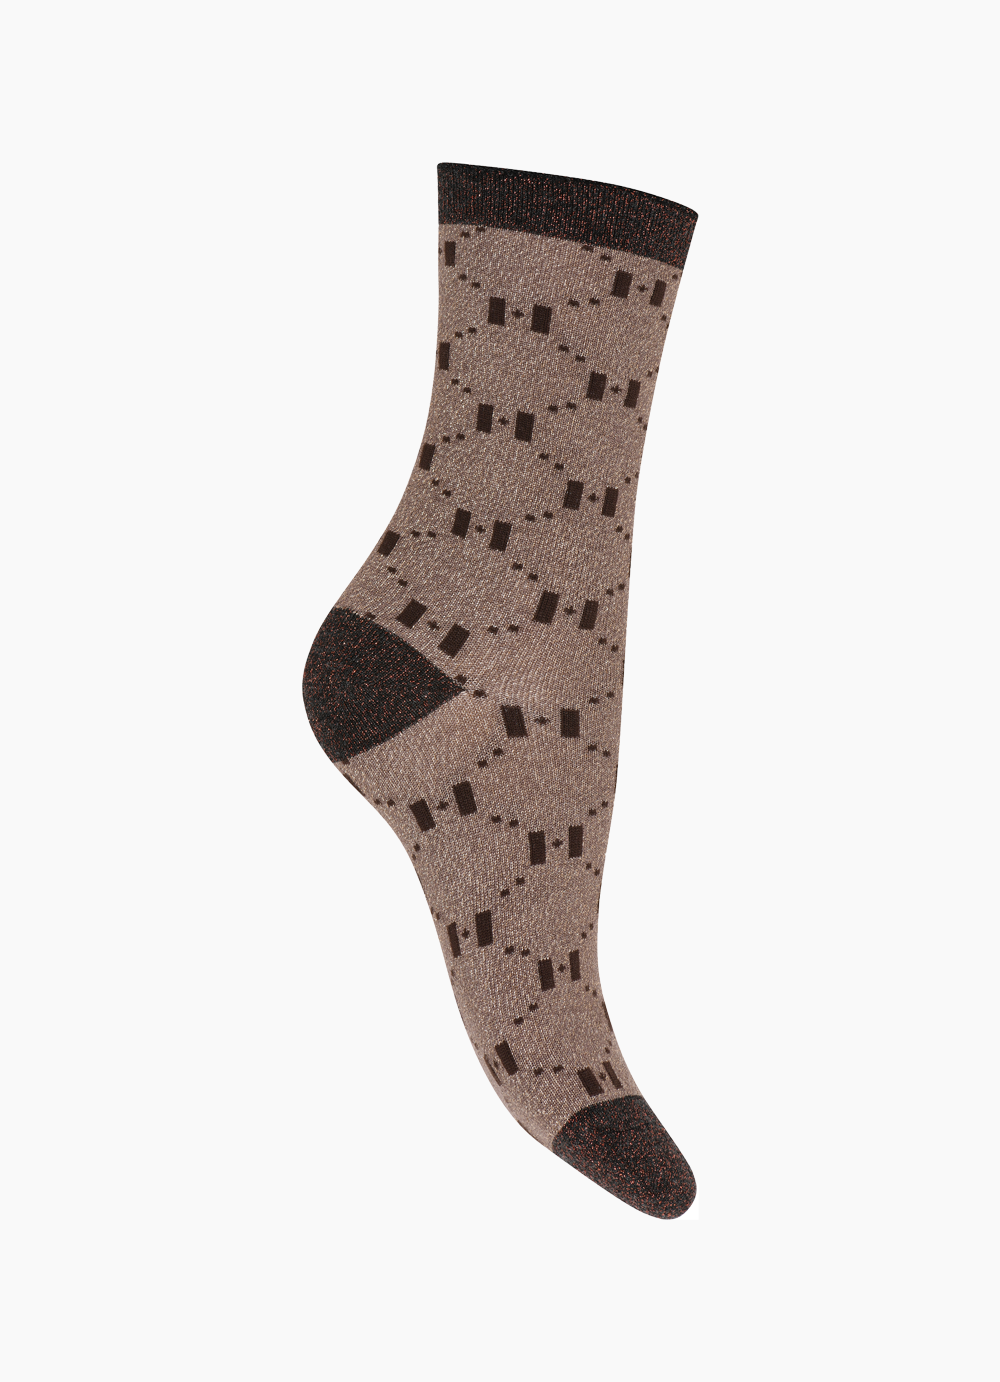 Fashion Sock 9086 - Brown - Hype the Detail